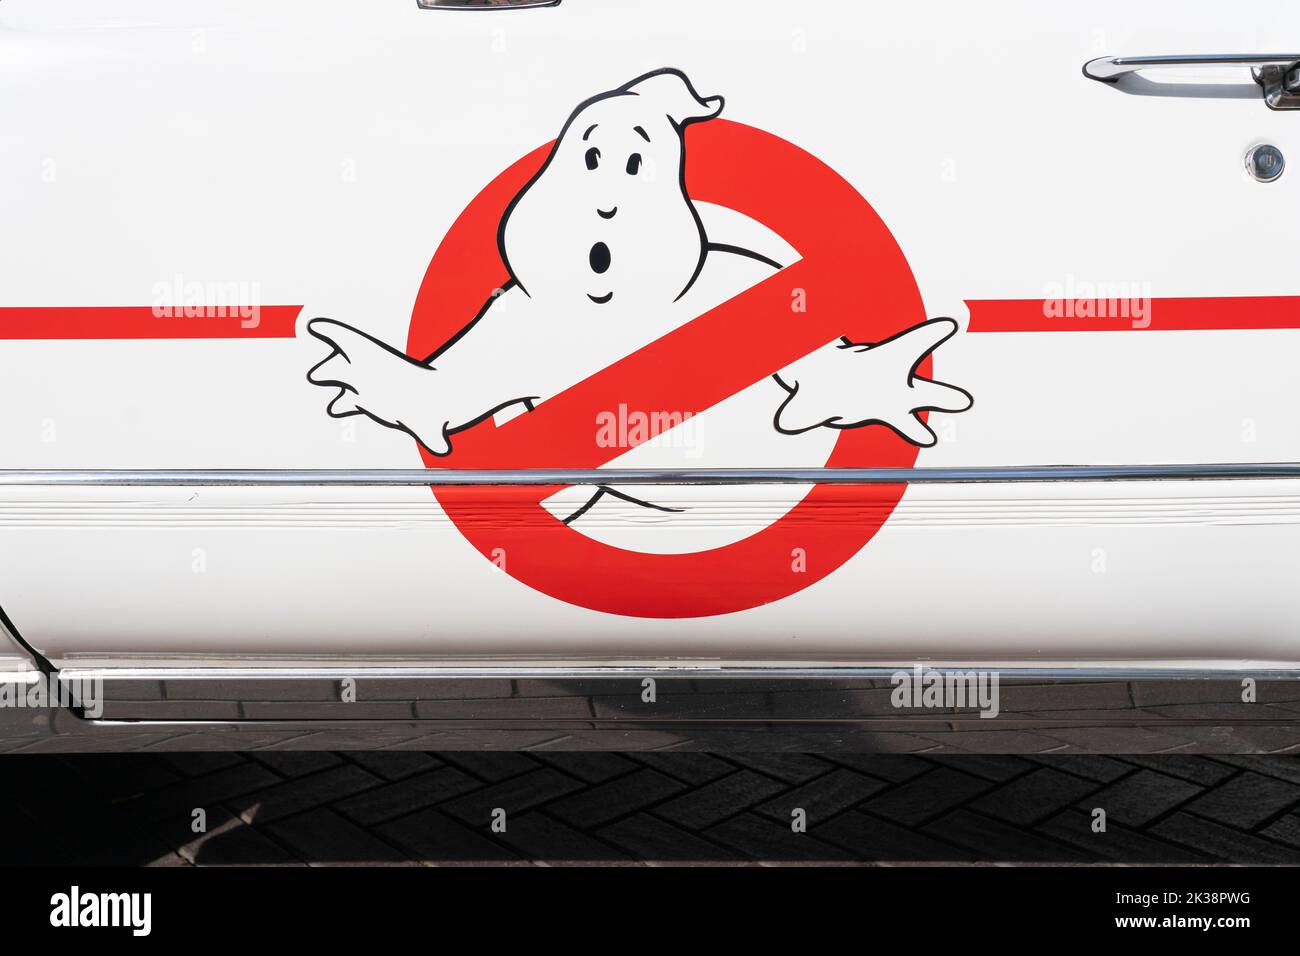 The Ghostbusters logo / emblem on a replica Ghostbusters ECTO 1 car on London Street, by Love Basingstoke in support of Exit 6 Film Festival. UK Stock Photo